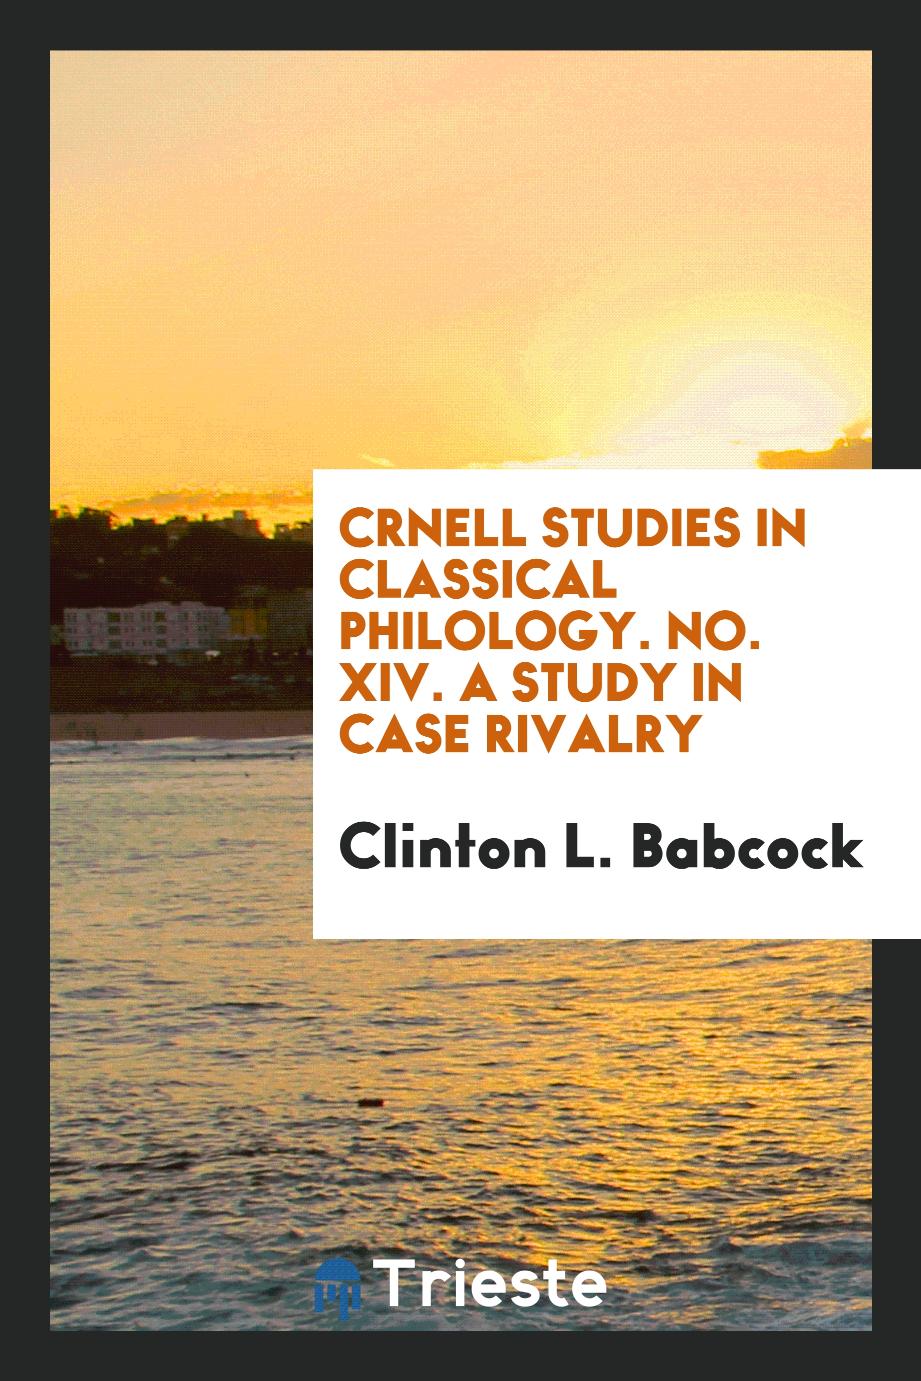 Crnell Studies in classical philology. No. XIV. A Study in Case Rivalry